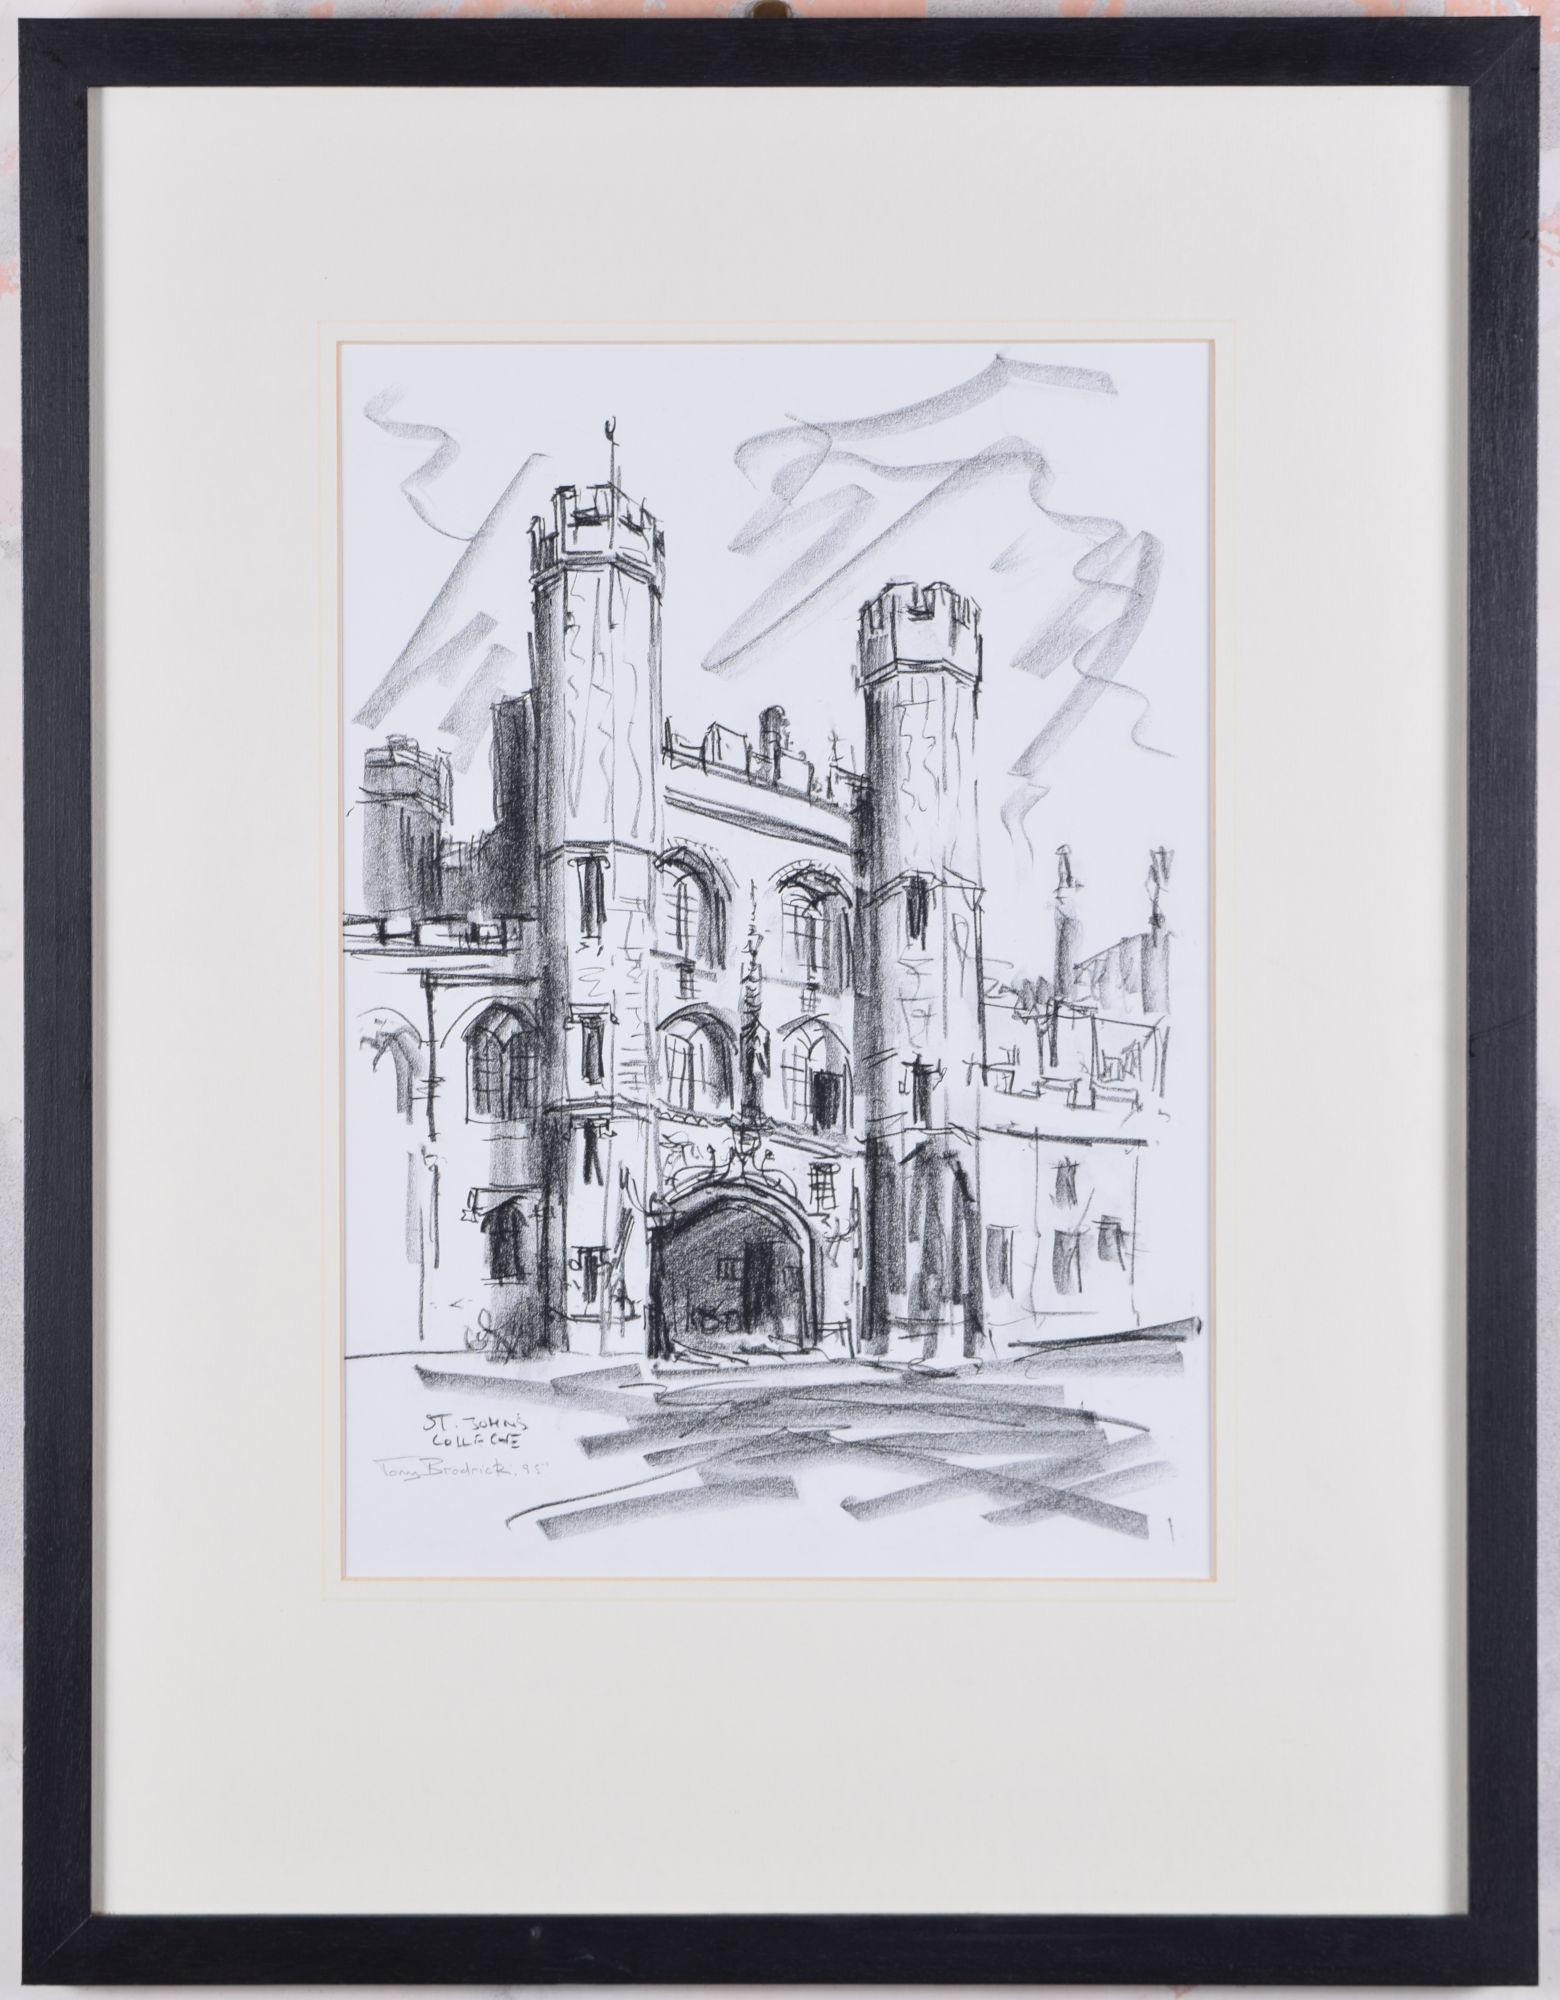 To see our other views of Oxford and Cambridge, scroll down to "More from this Seller" and below it click on "See all from this Seller" - or send us a message if you cannot find the view you want.

Tony Broderick (late 20th century)
St John's